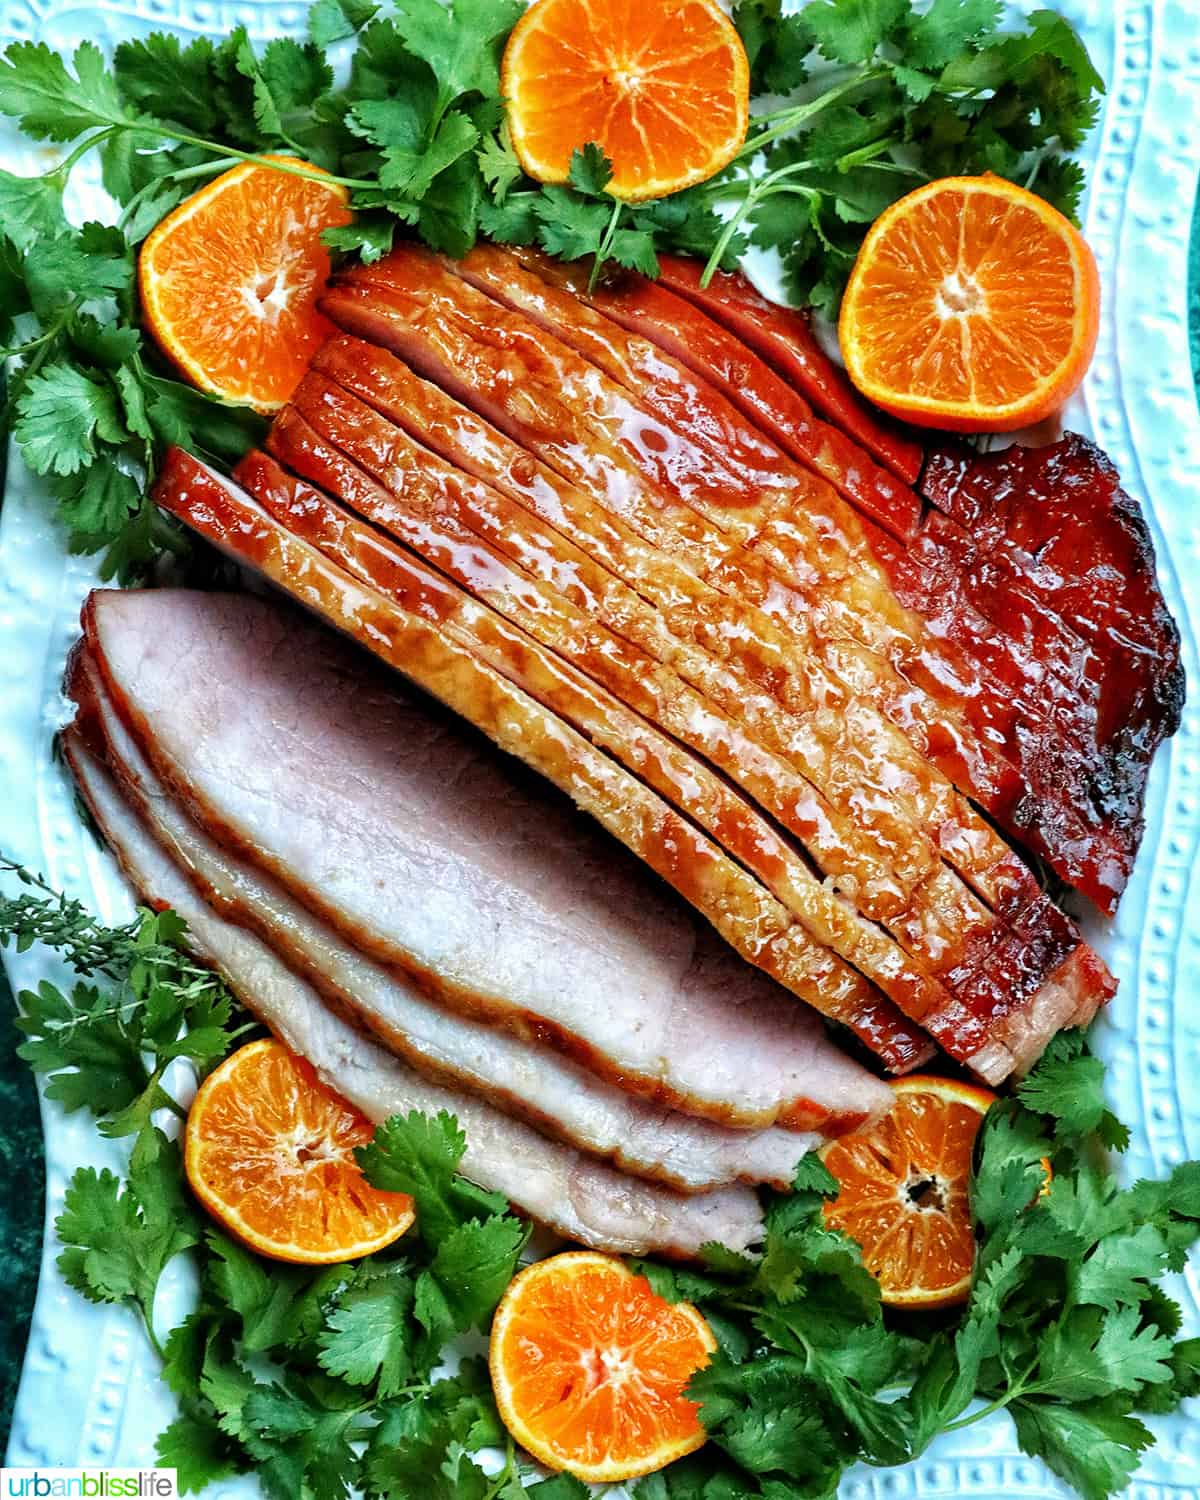 sliced honey glazed air fryer ham on a plate with fresh herbs and sliced oranges.